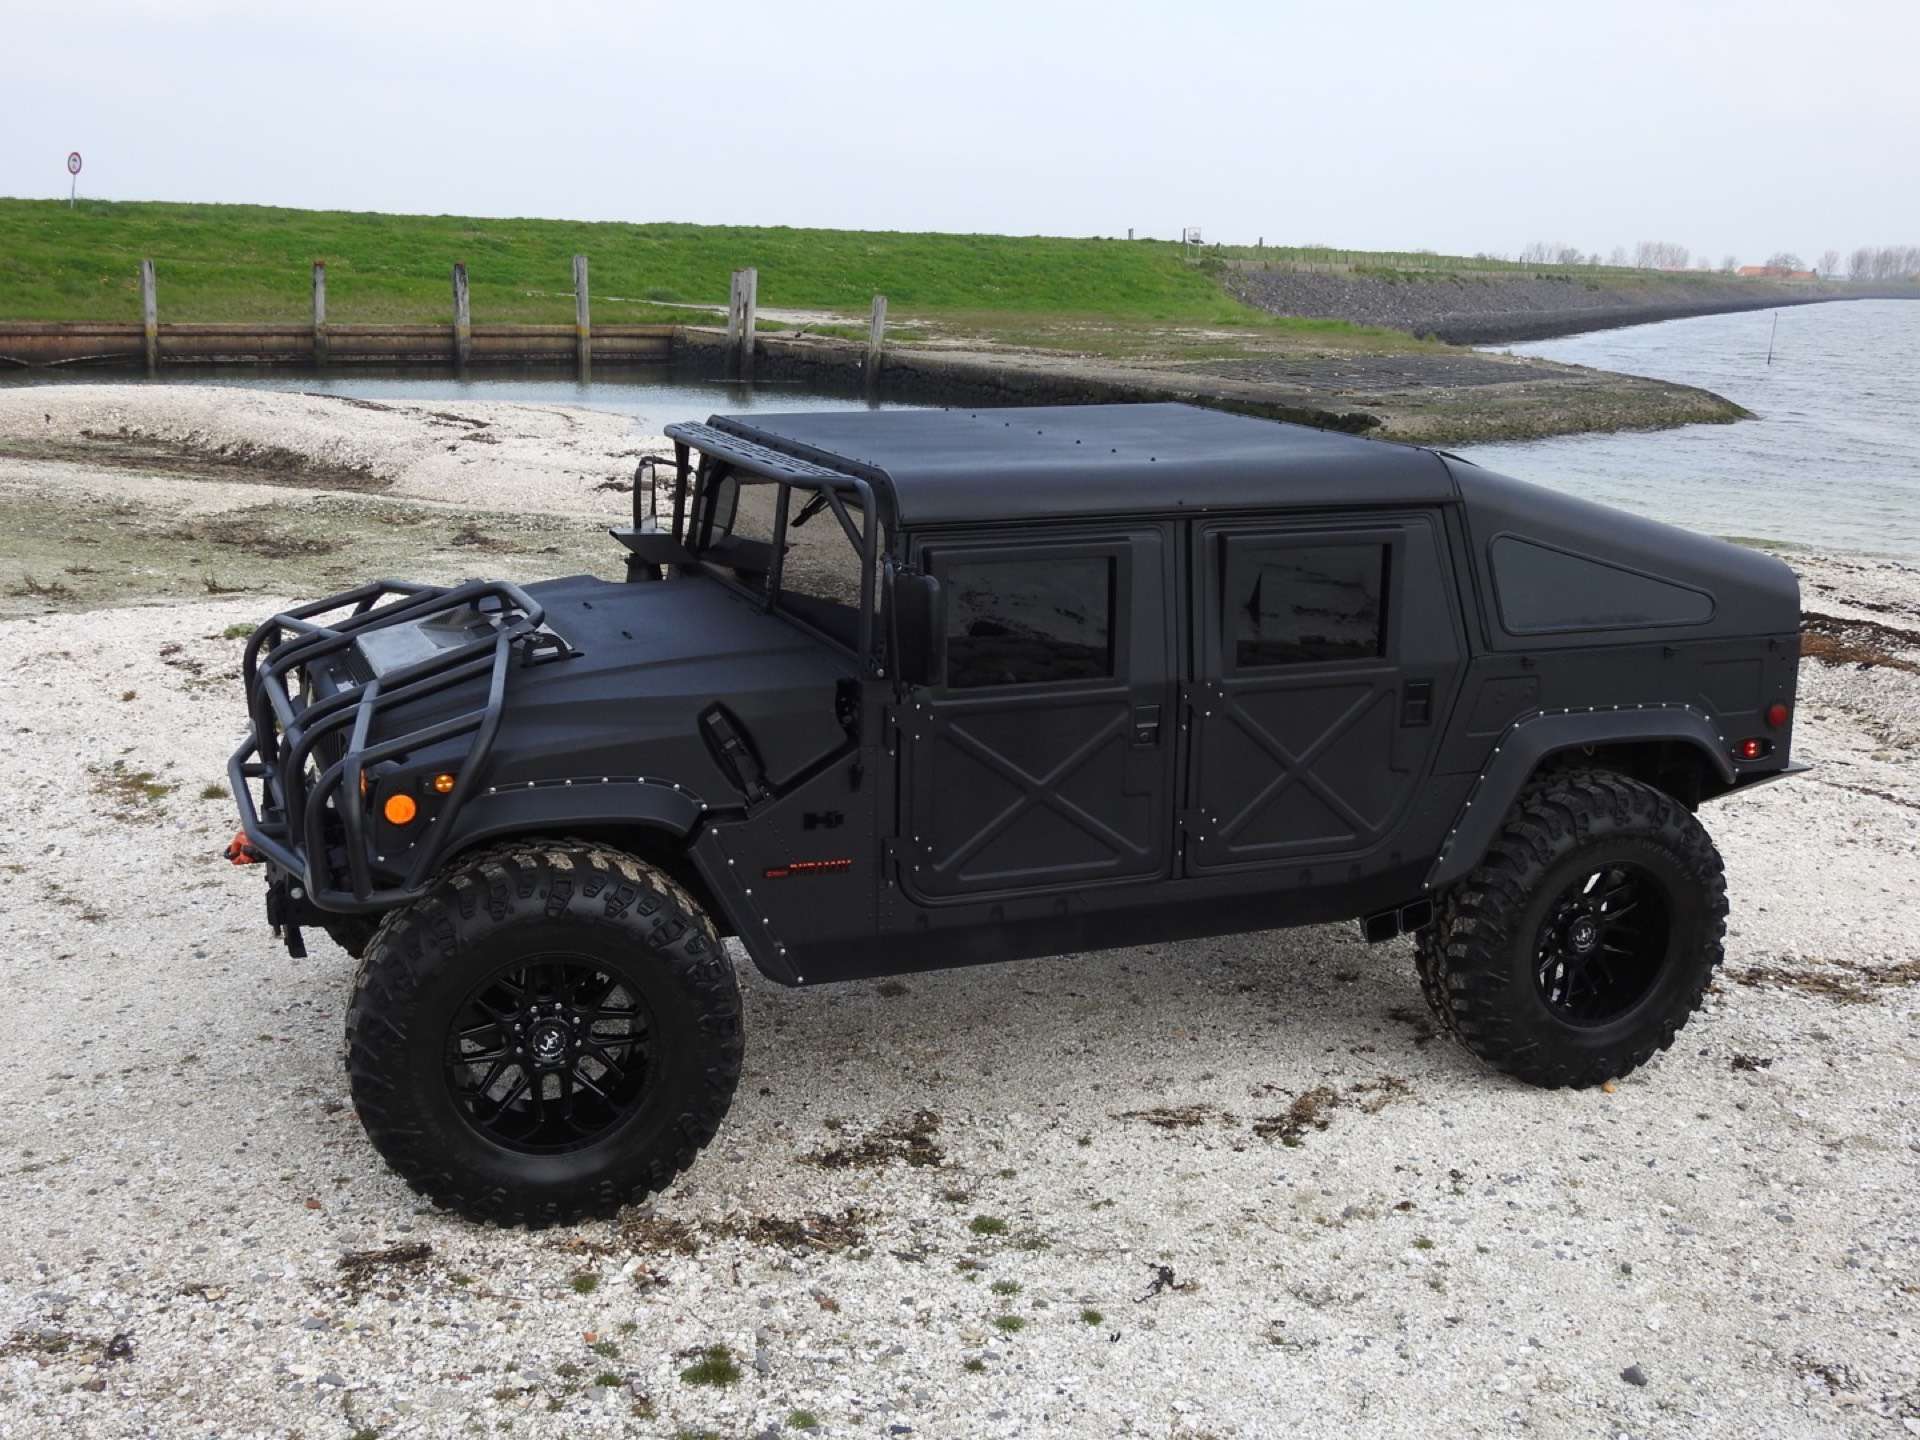 HUMMER H1 Other in Black used in BRUINISSE for € 198,000.-